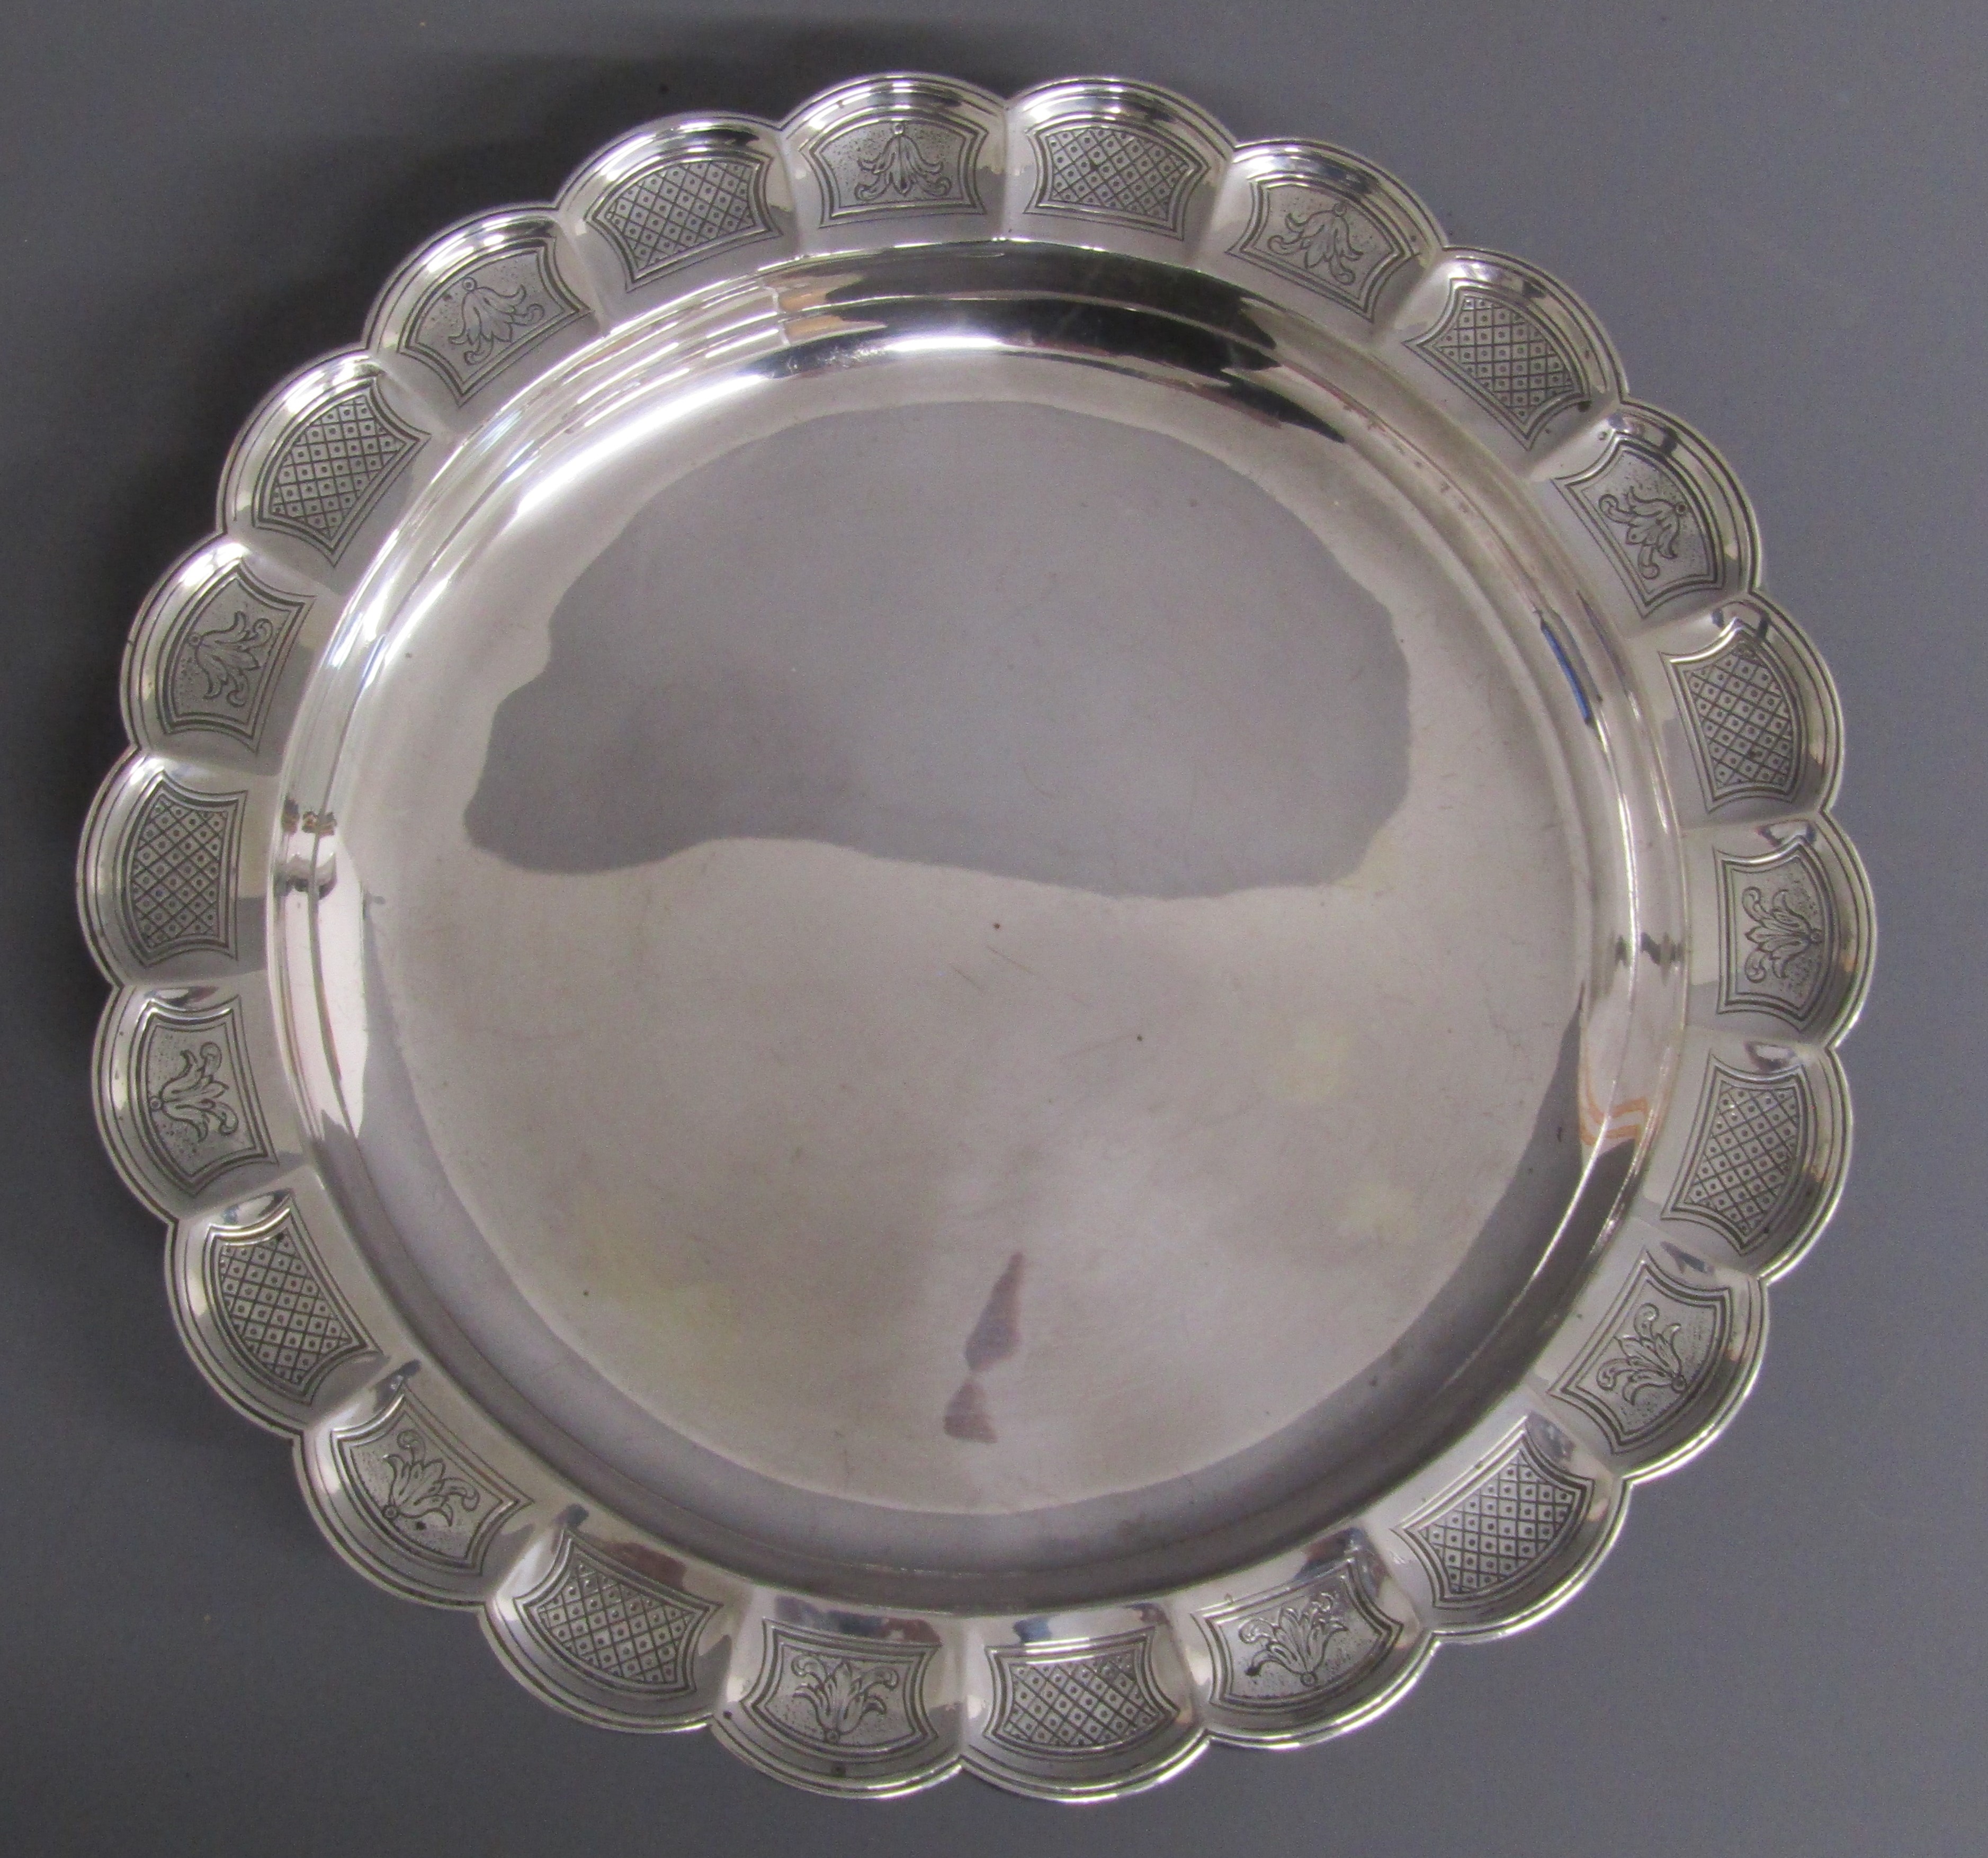 Charles Richard Comyns London 1919 footed silver salver - approx 26cm dia. & 900g/28.93ozt - Image 3 of 6